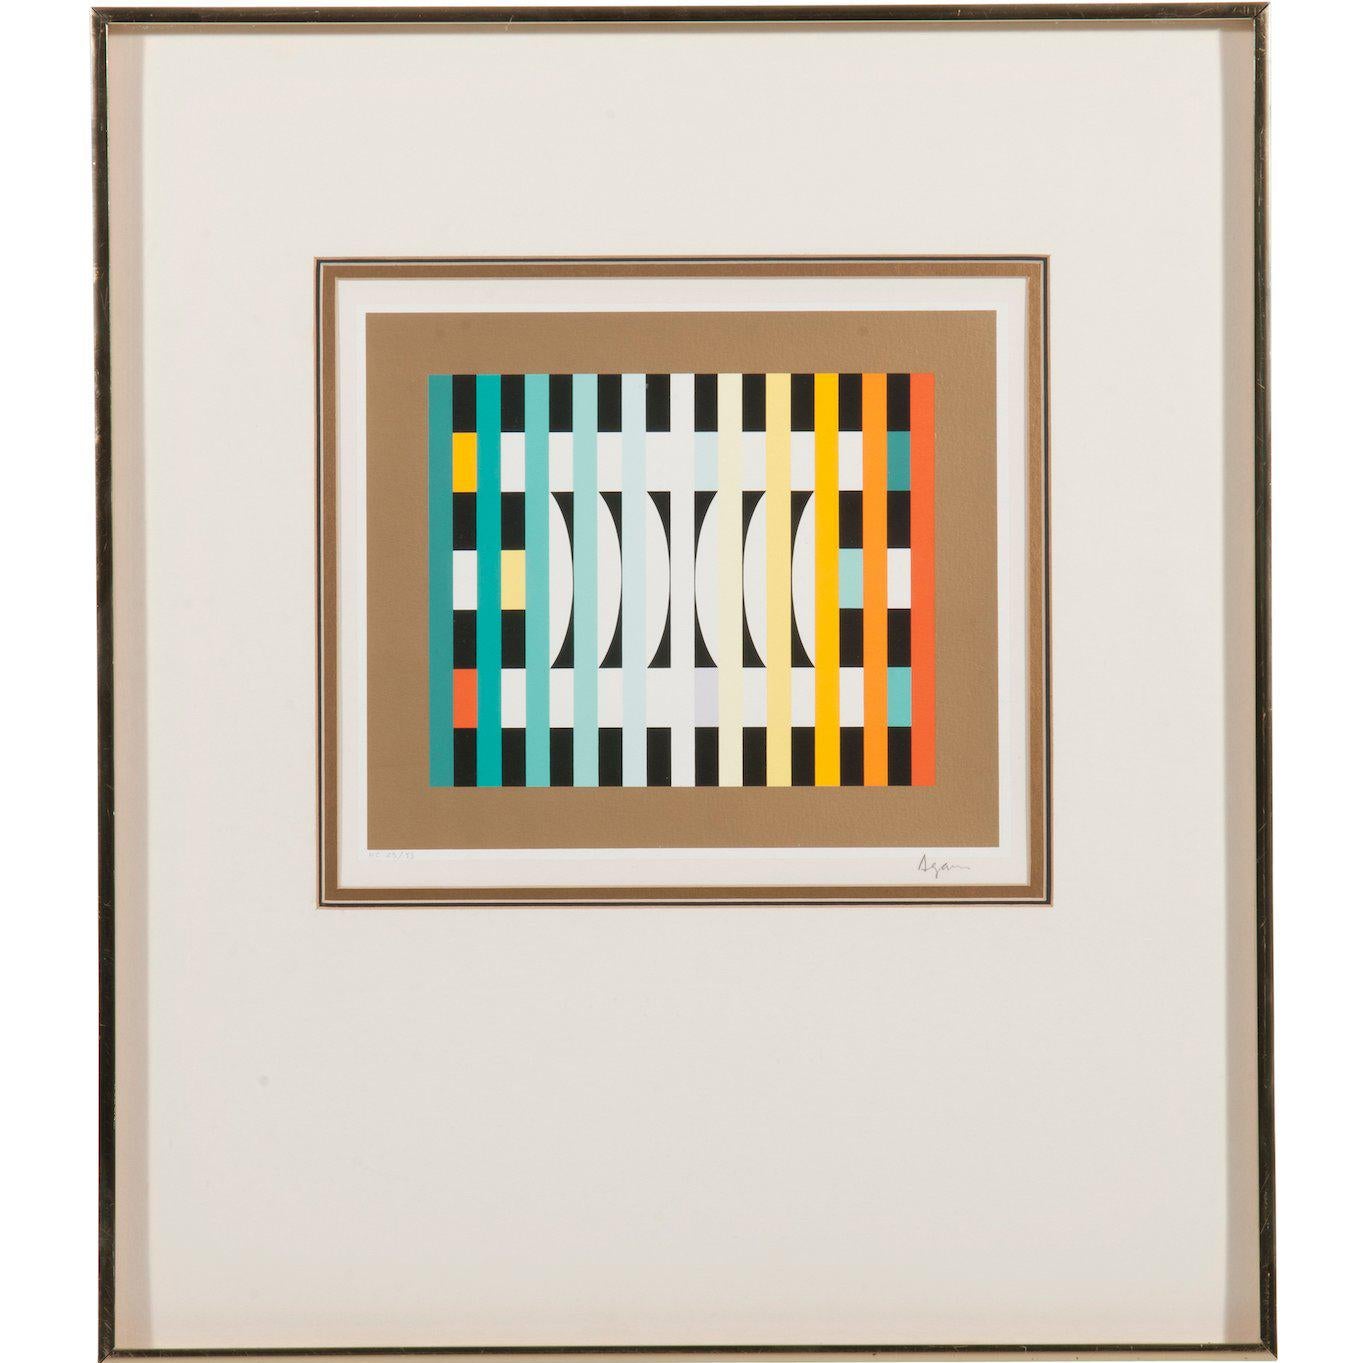 Kinetic Op Art Serigraph Titled Counter Rhythm by Yaacov Agam, 1980 For Sale